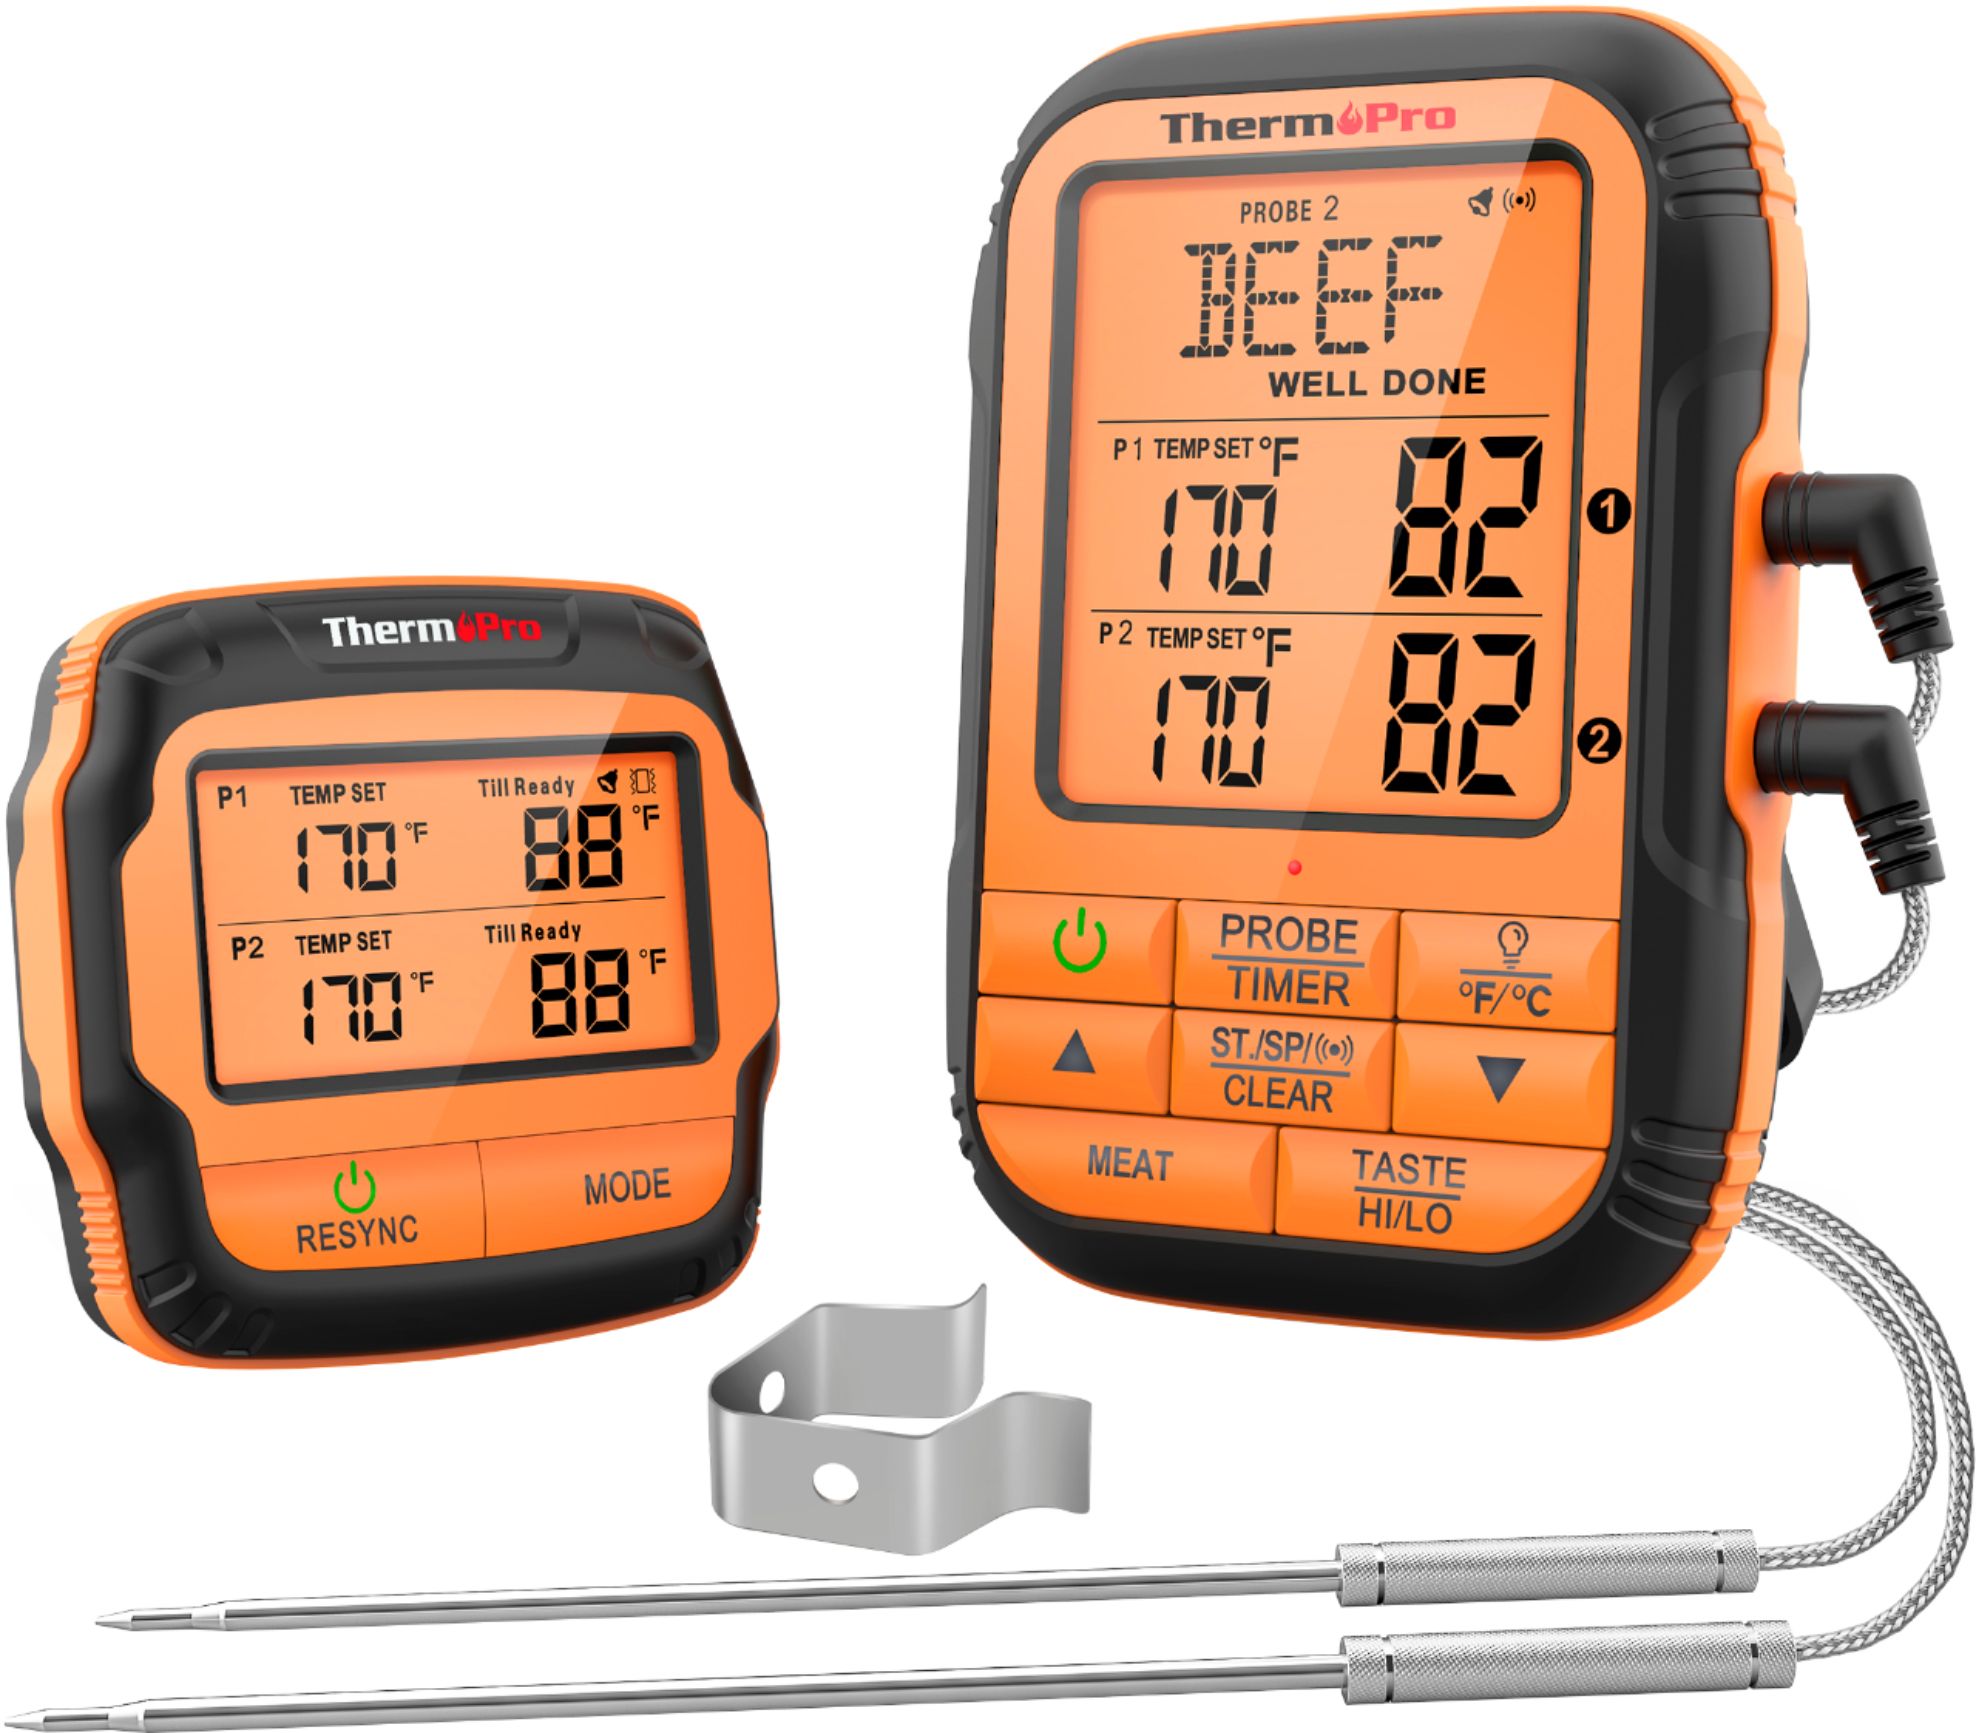 Angle View: ThermoPro - Dual Probe Wireless Meat Thermometer - ORANGE